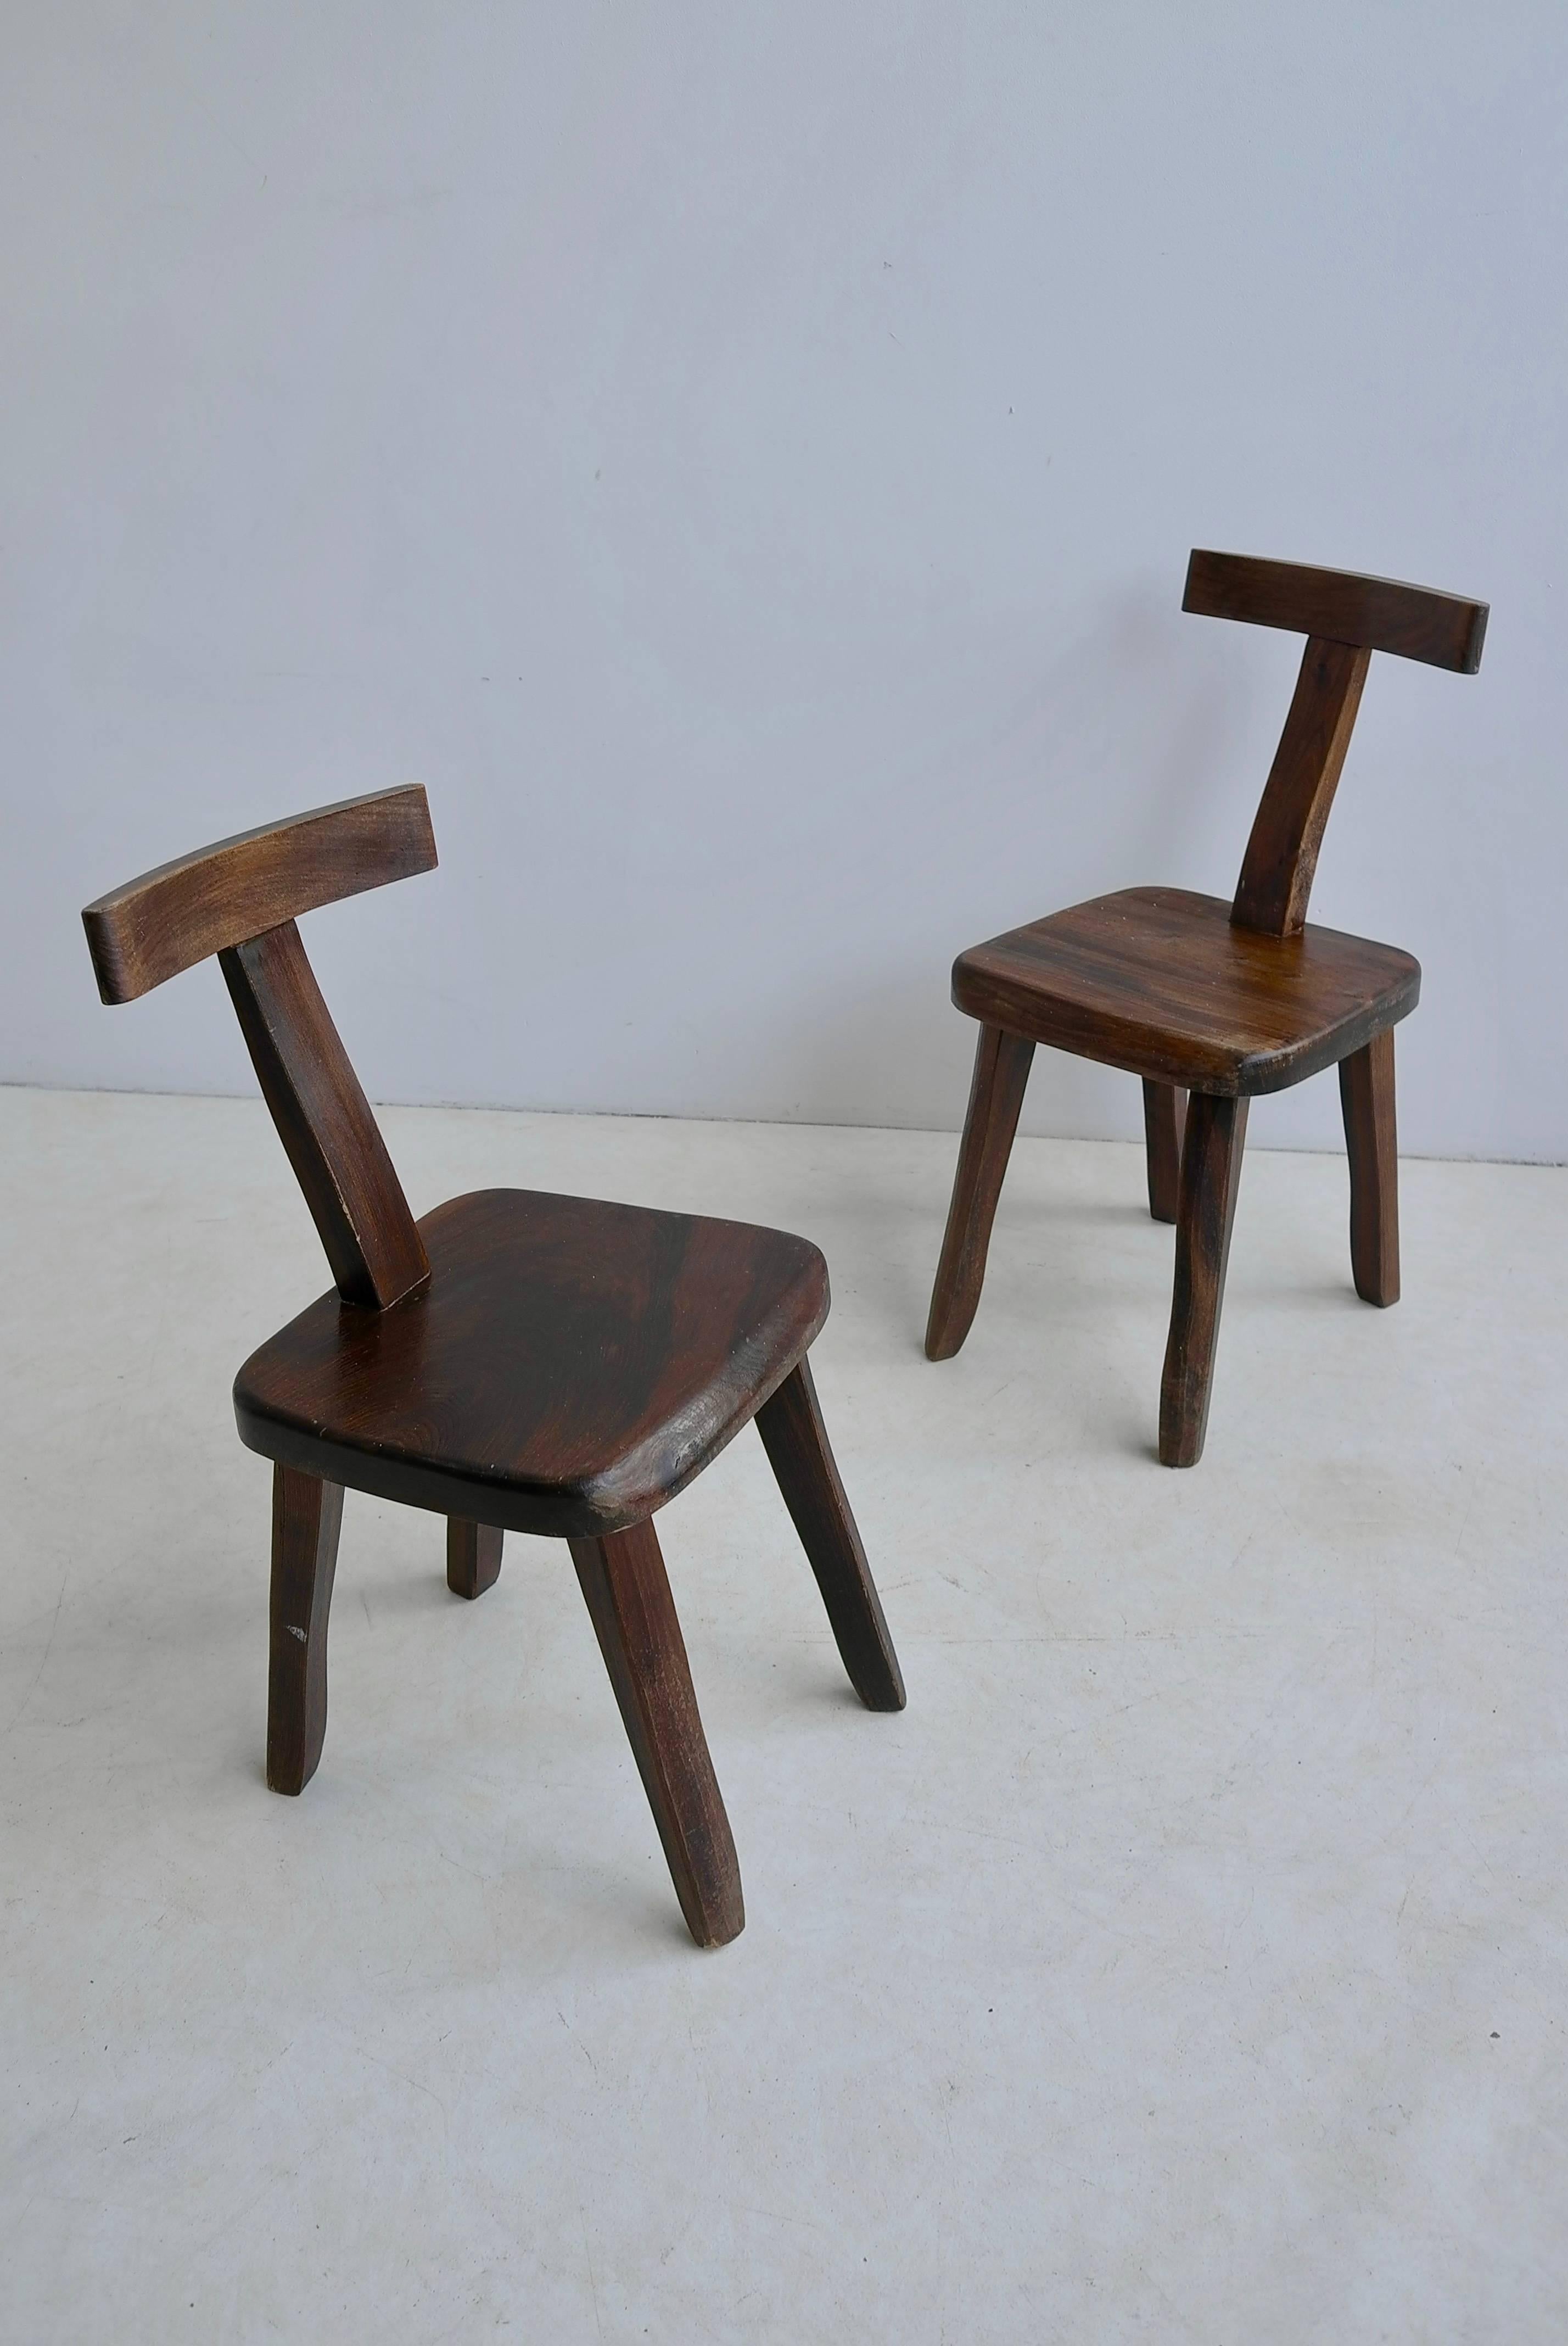 Finnish Pair of Chairs by Olavi Hanninen for by Mikko Nupponen, Finland, 1950s